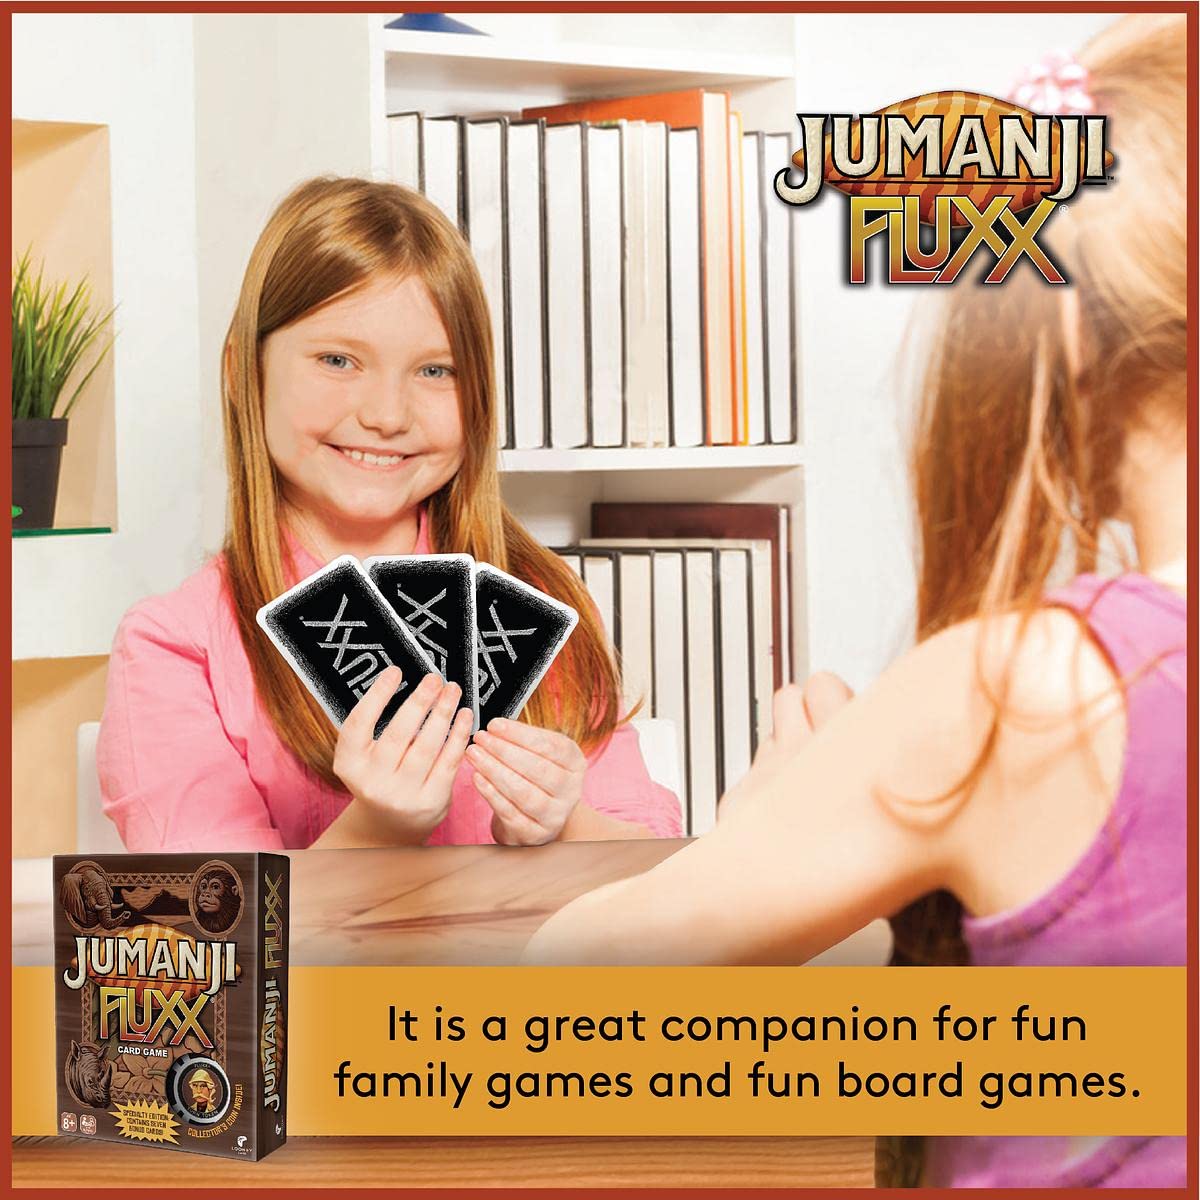 LOONEY LABS Jumanji Fluxx Card Game - Best Jumanji Game Fun Family Games for Kids and Adults Deluxe Card Games Jumanji Board Game Party Games Kid Teens Adult 2-6 Player Games Ages 8+ Specialty Edition